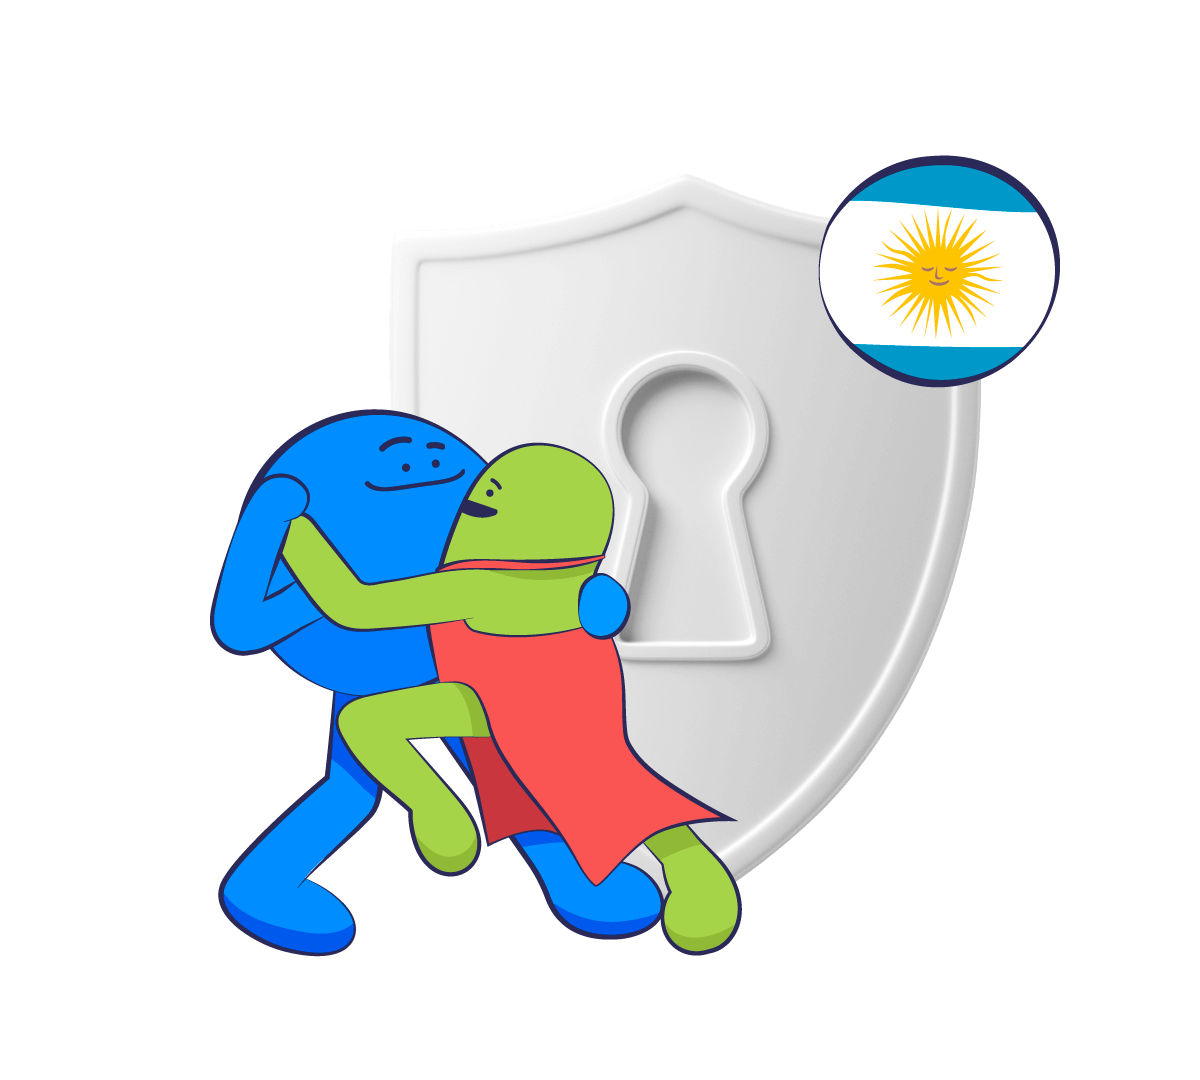 Argentina VPN for privacy and freedom